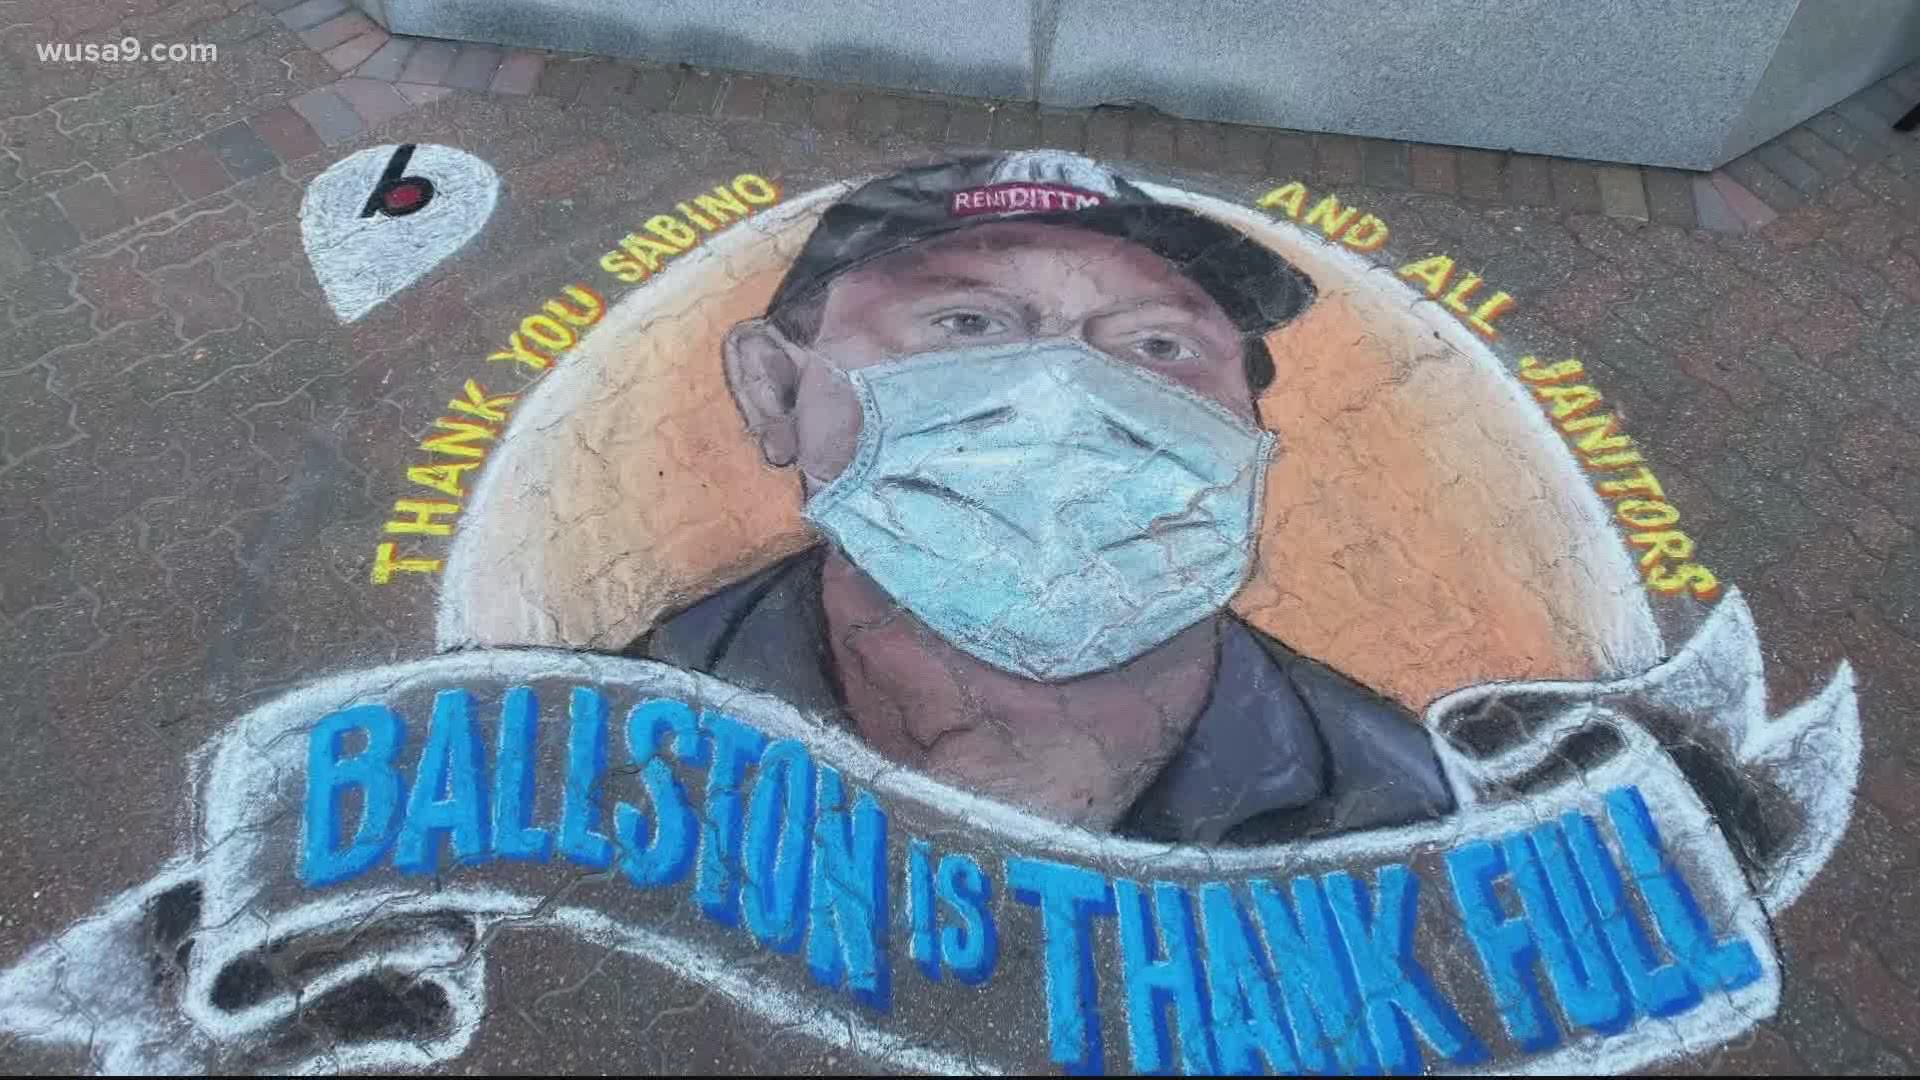 A local artist is creating special artwork to thank the front-line workers of the coronavirus pandemic.